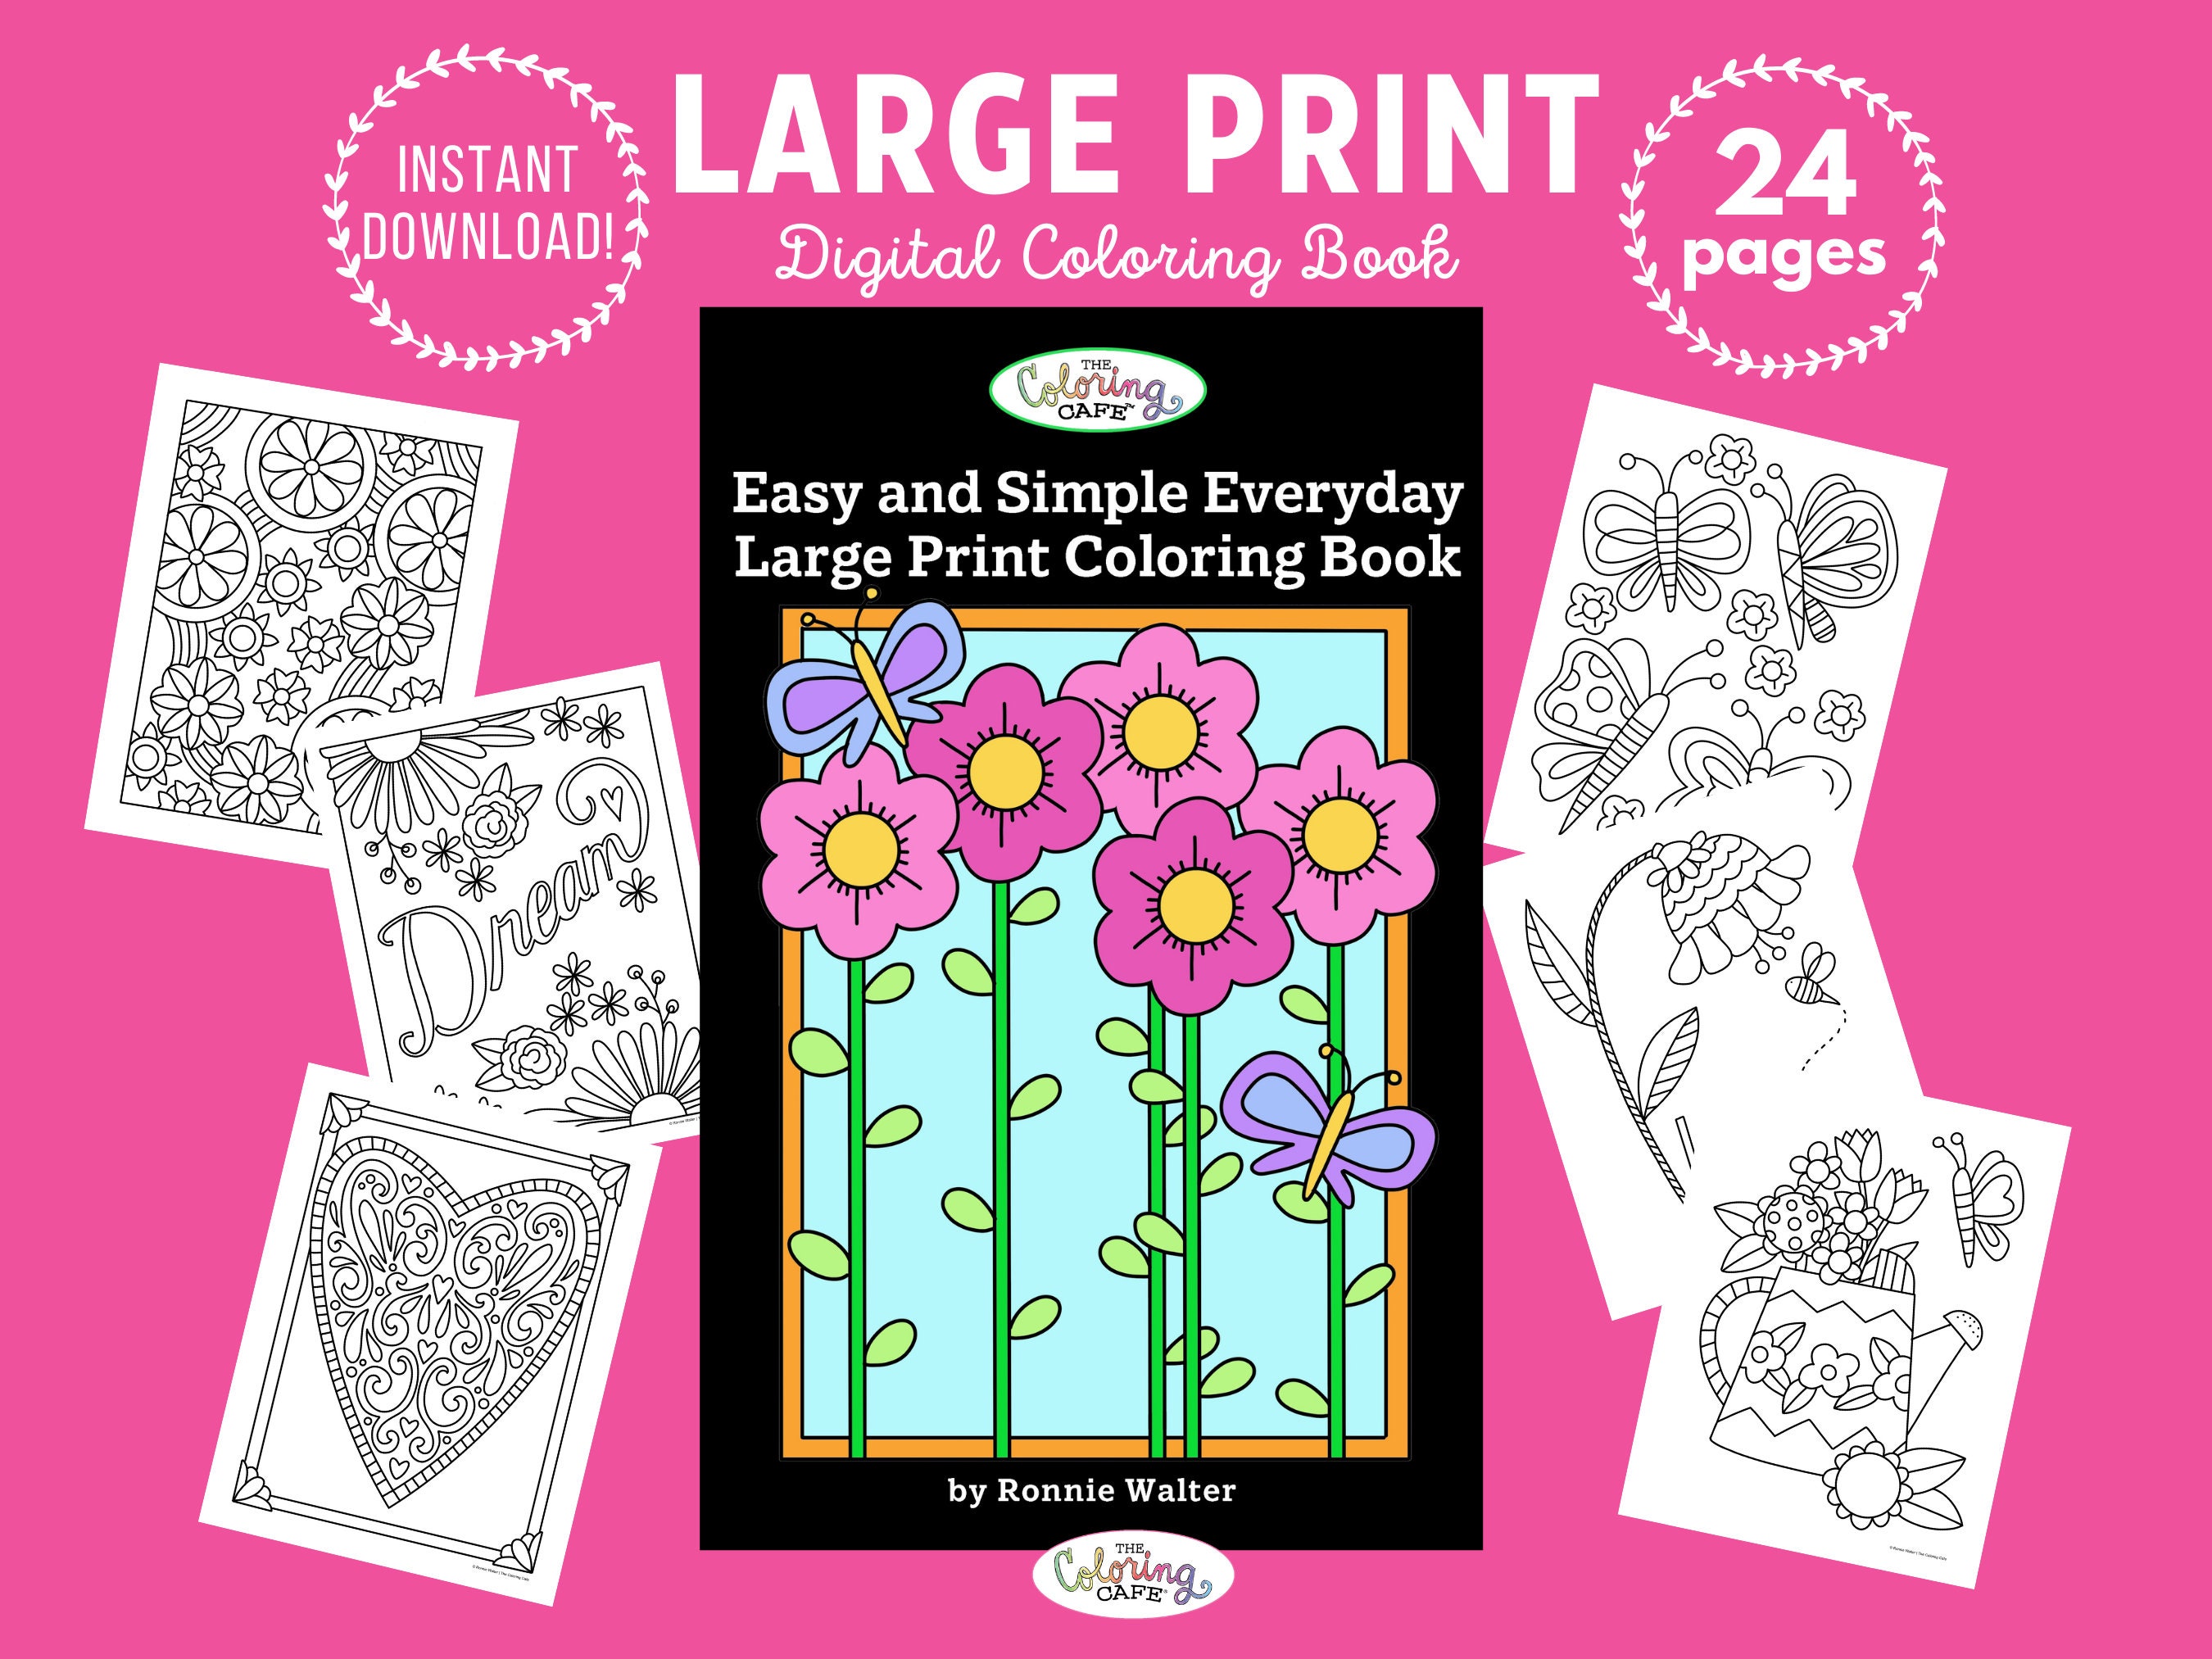 How to Choose the Best Paper for Coloring Pages – 20+ Papers Compared!